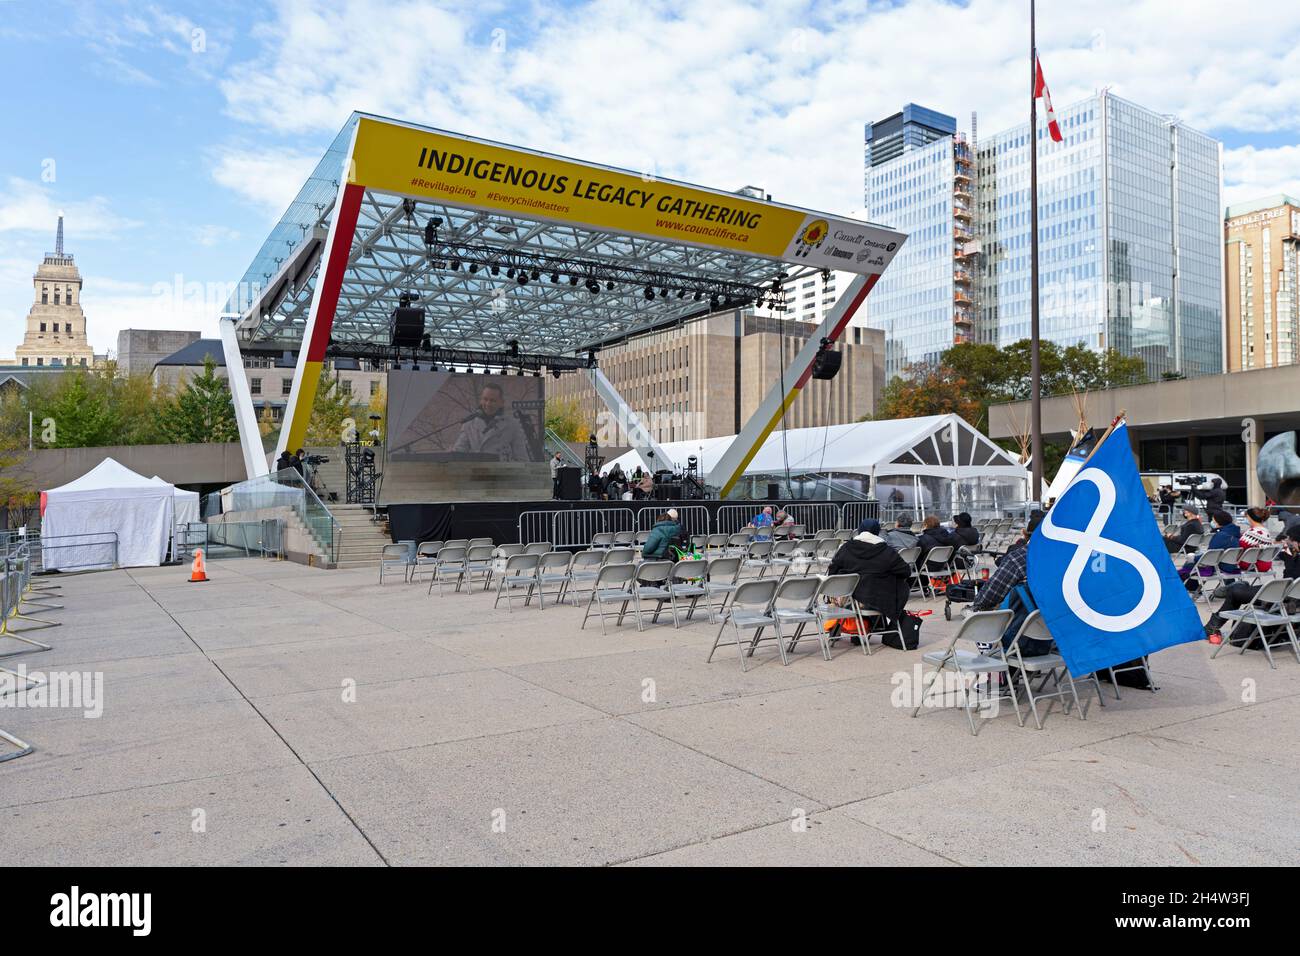 Indigenous Legacy Gathering, on November 4, 2021 in Toronto, Nathan Phillips Square, Canada Stock Photo